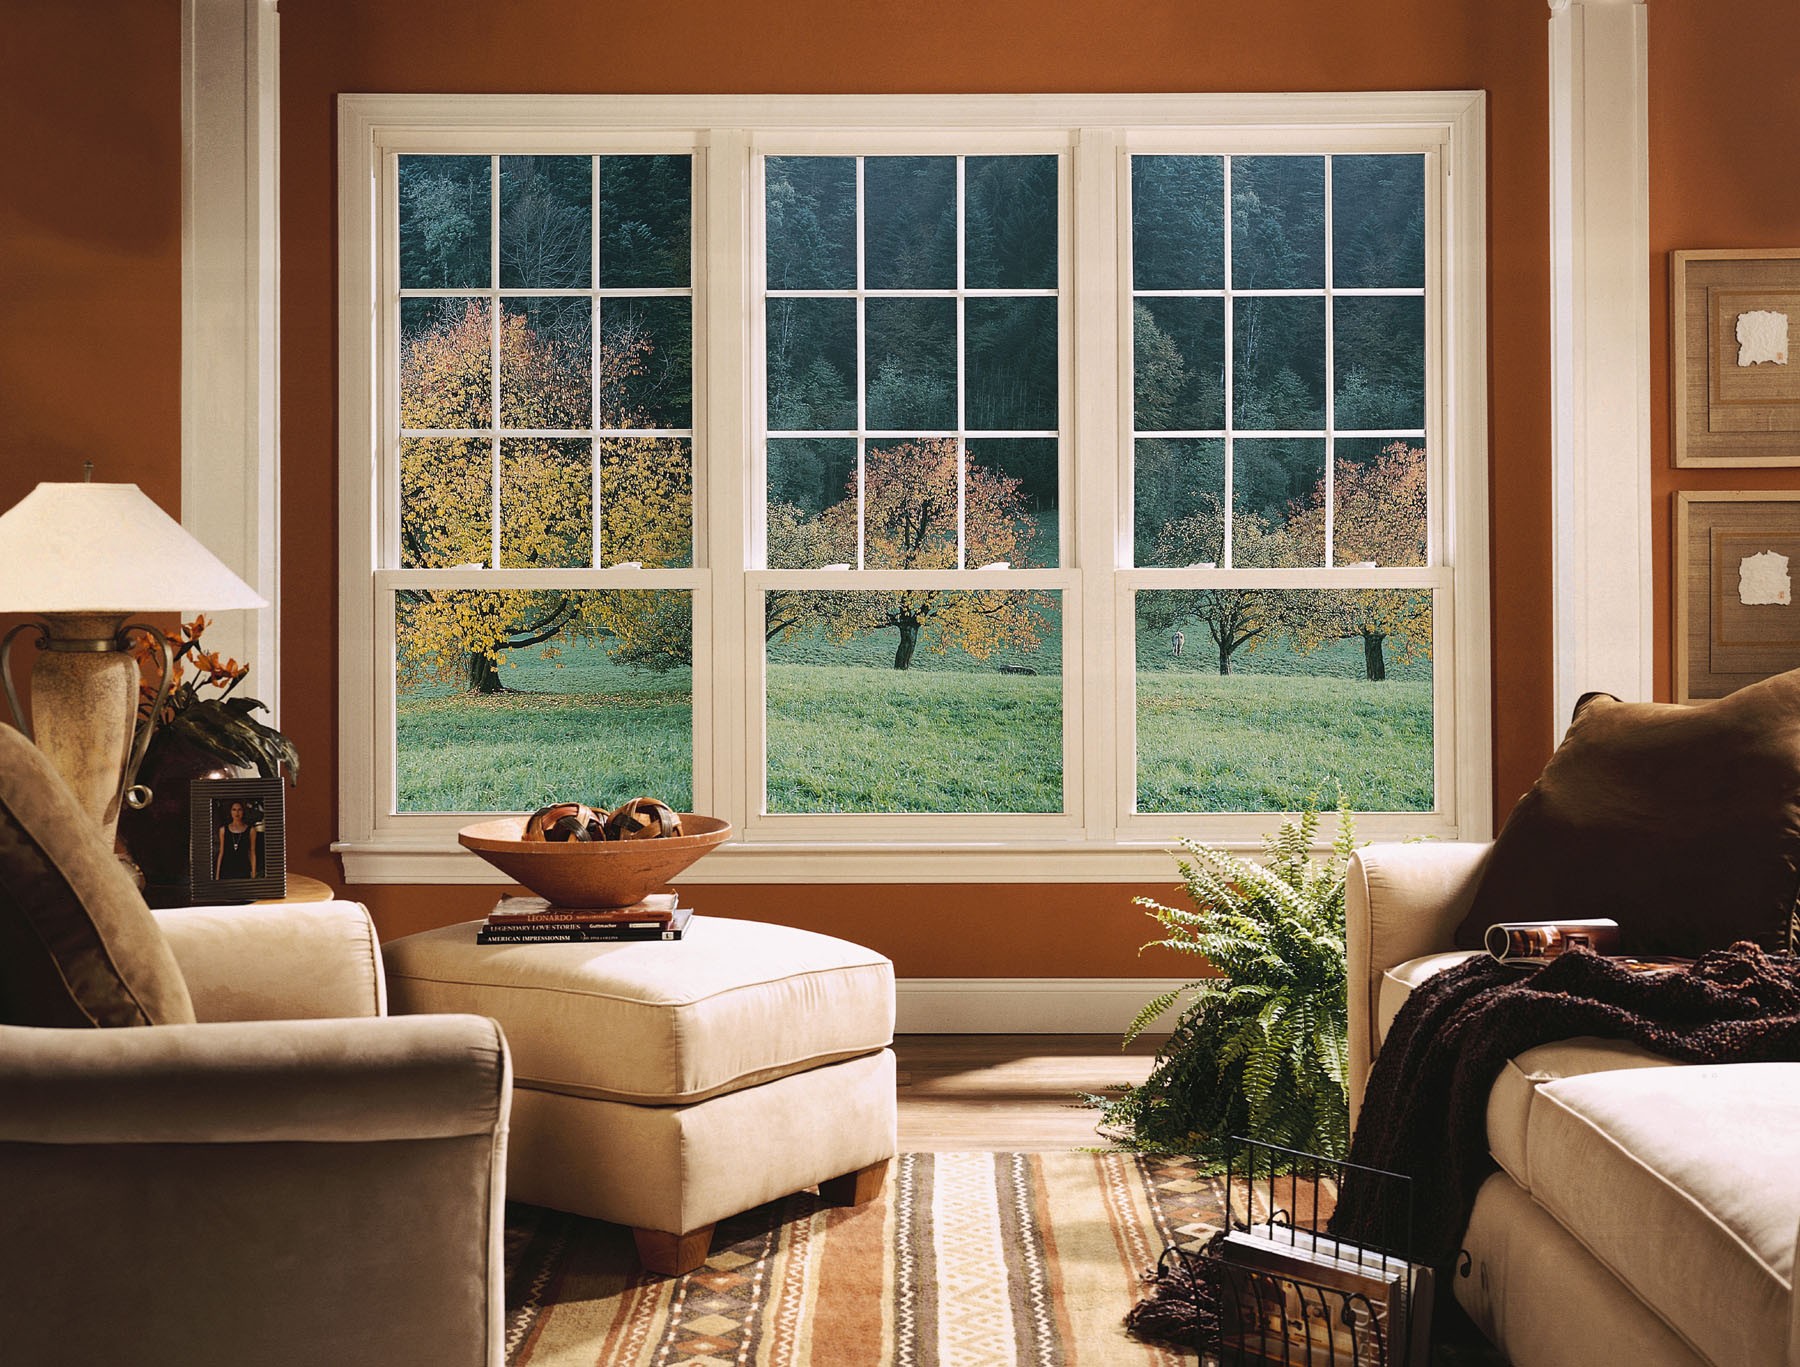 7 Tips to Choosing the Right Windows for Your Home